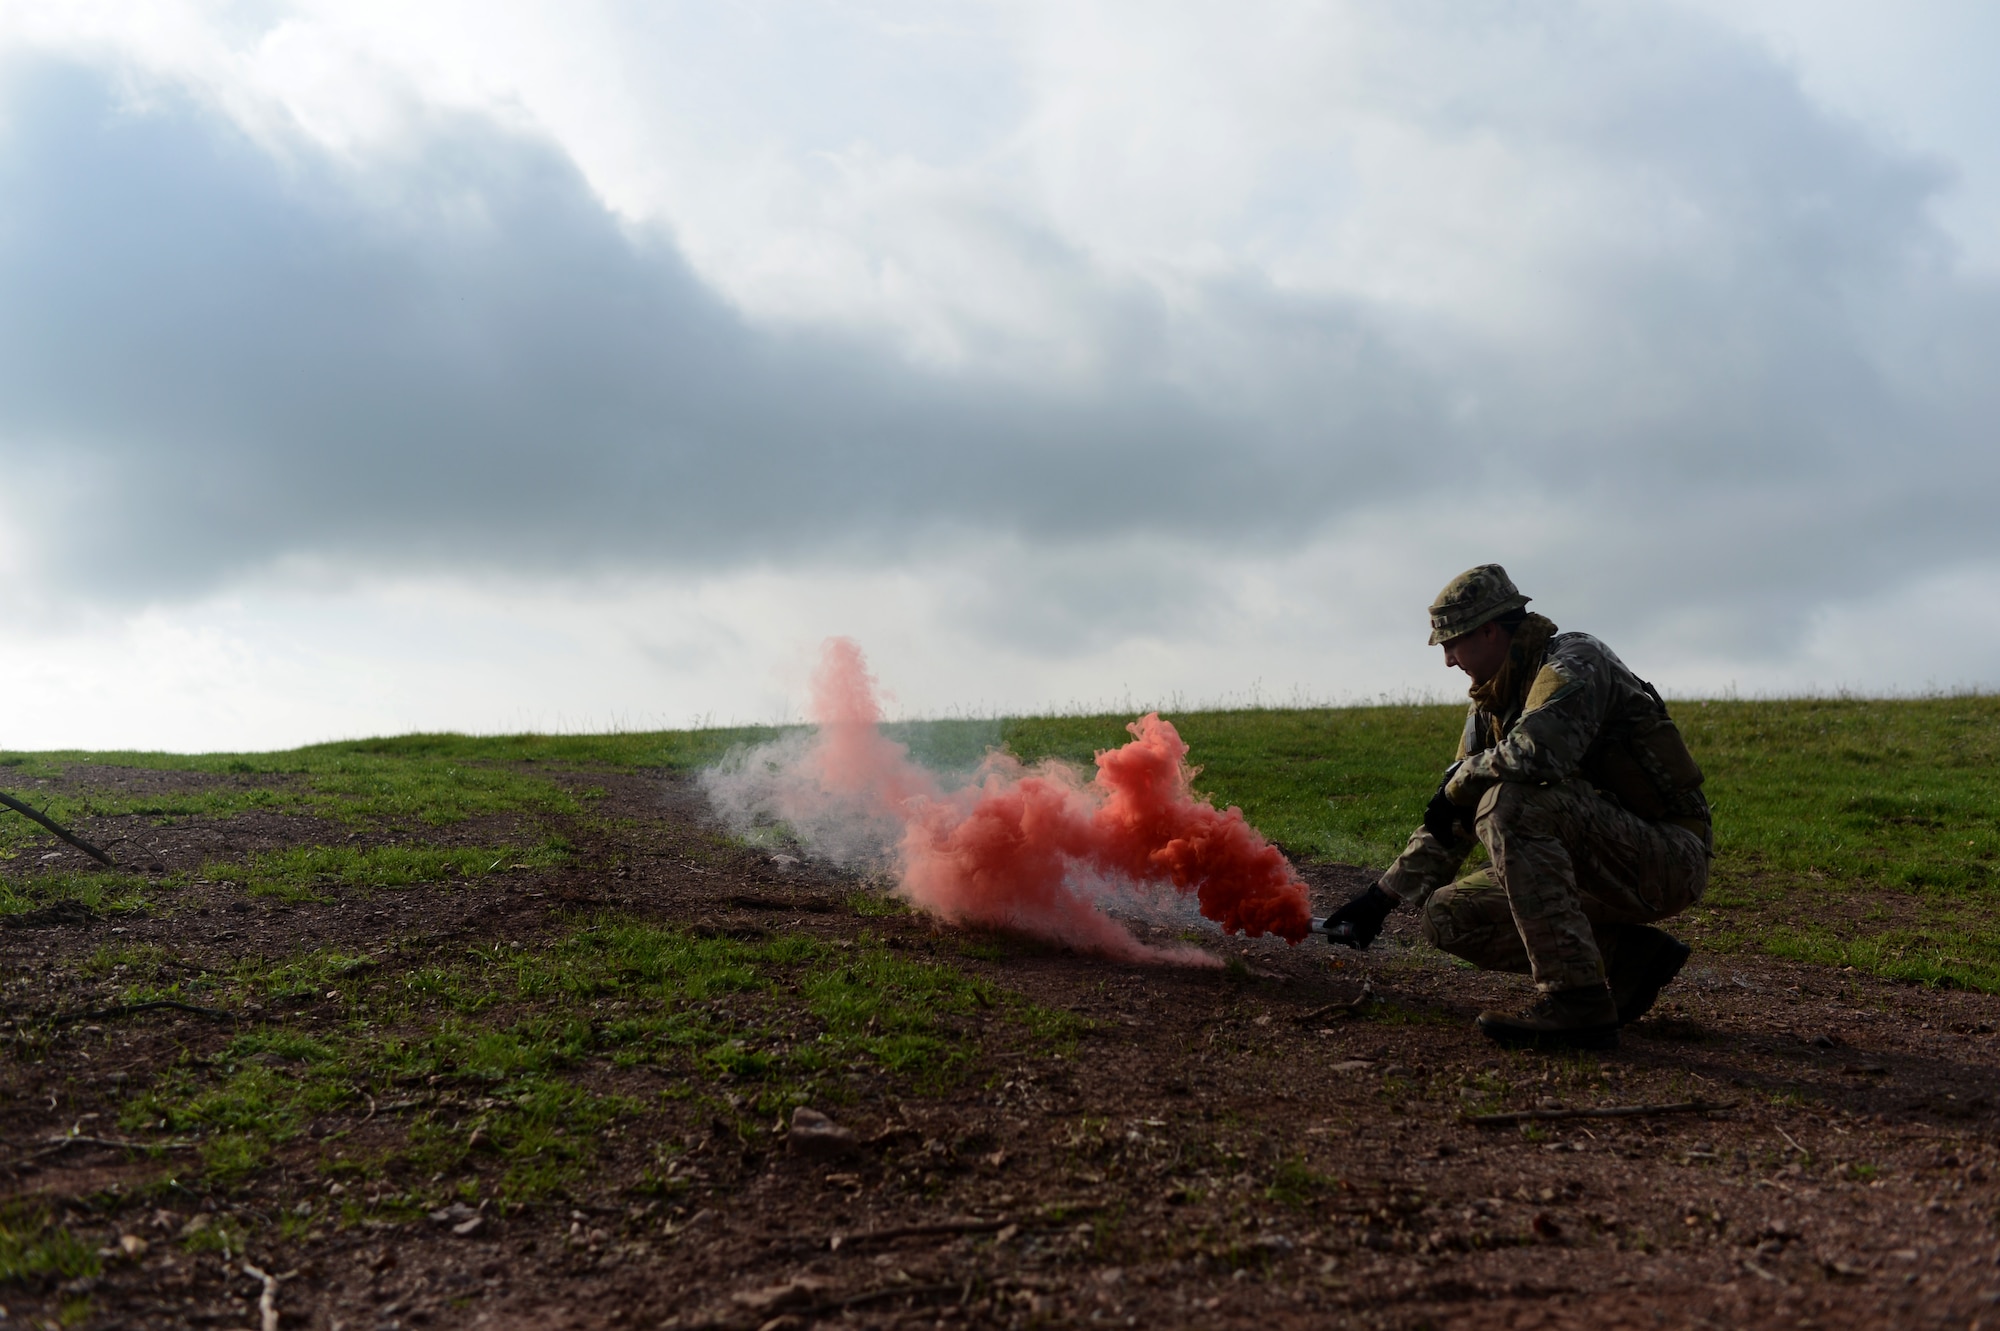 U.S. Air Force Tech. Sgt. John Long, 52nd Operations Support Squadron survival, evasion, resistance and escape NCO in charge of weapons and tactics, demonstrates the use of smoke signaling during combat survival training on a range in Baumholder, Germany, Sept. 30, 2014. SERE training provides high-risk-of-isolation personnel the necessary skills needed to survive in all types of environments. (U.S. Air Force photo by Senior Airman Gustavo Castillo/Released) 